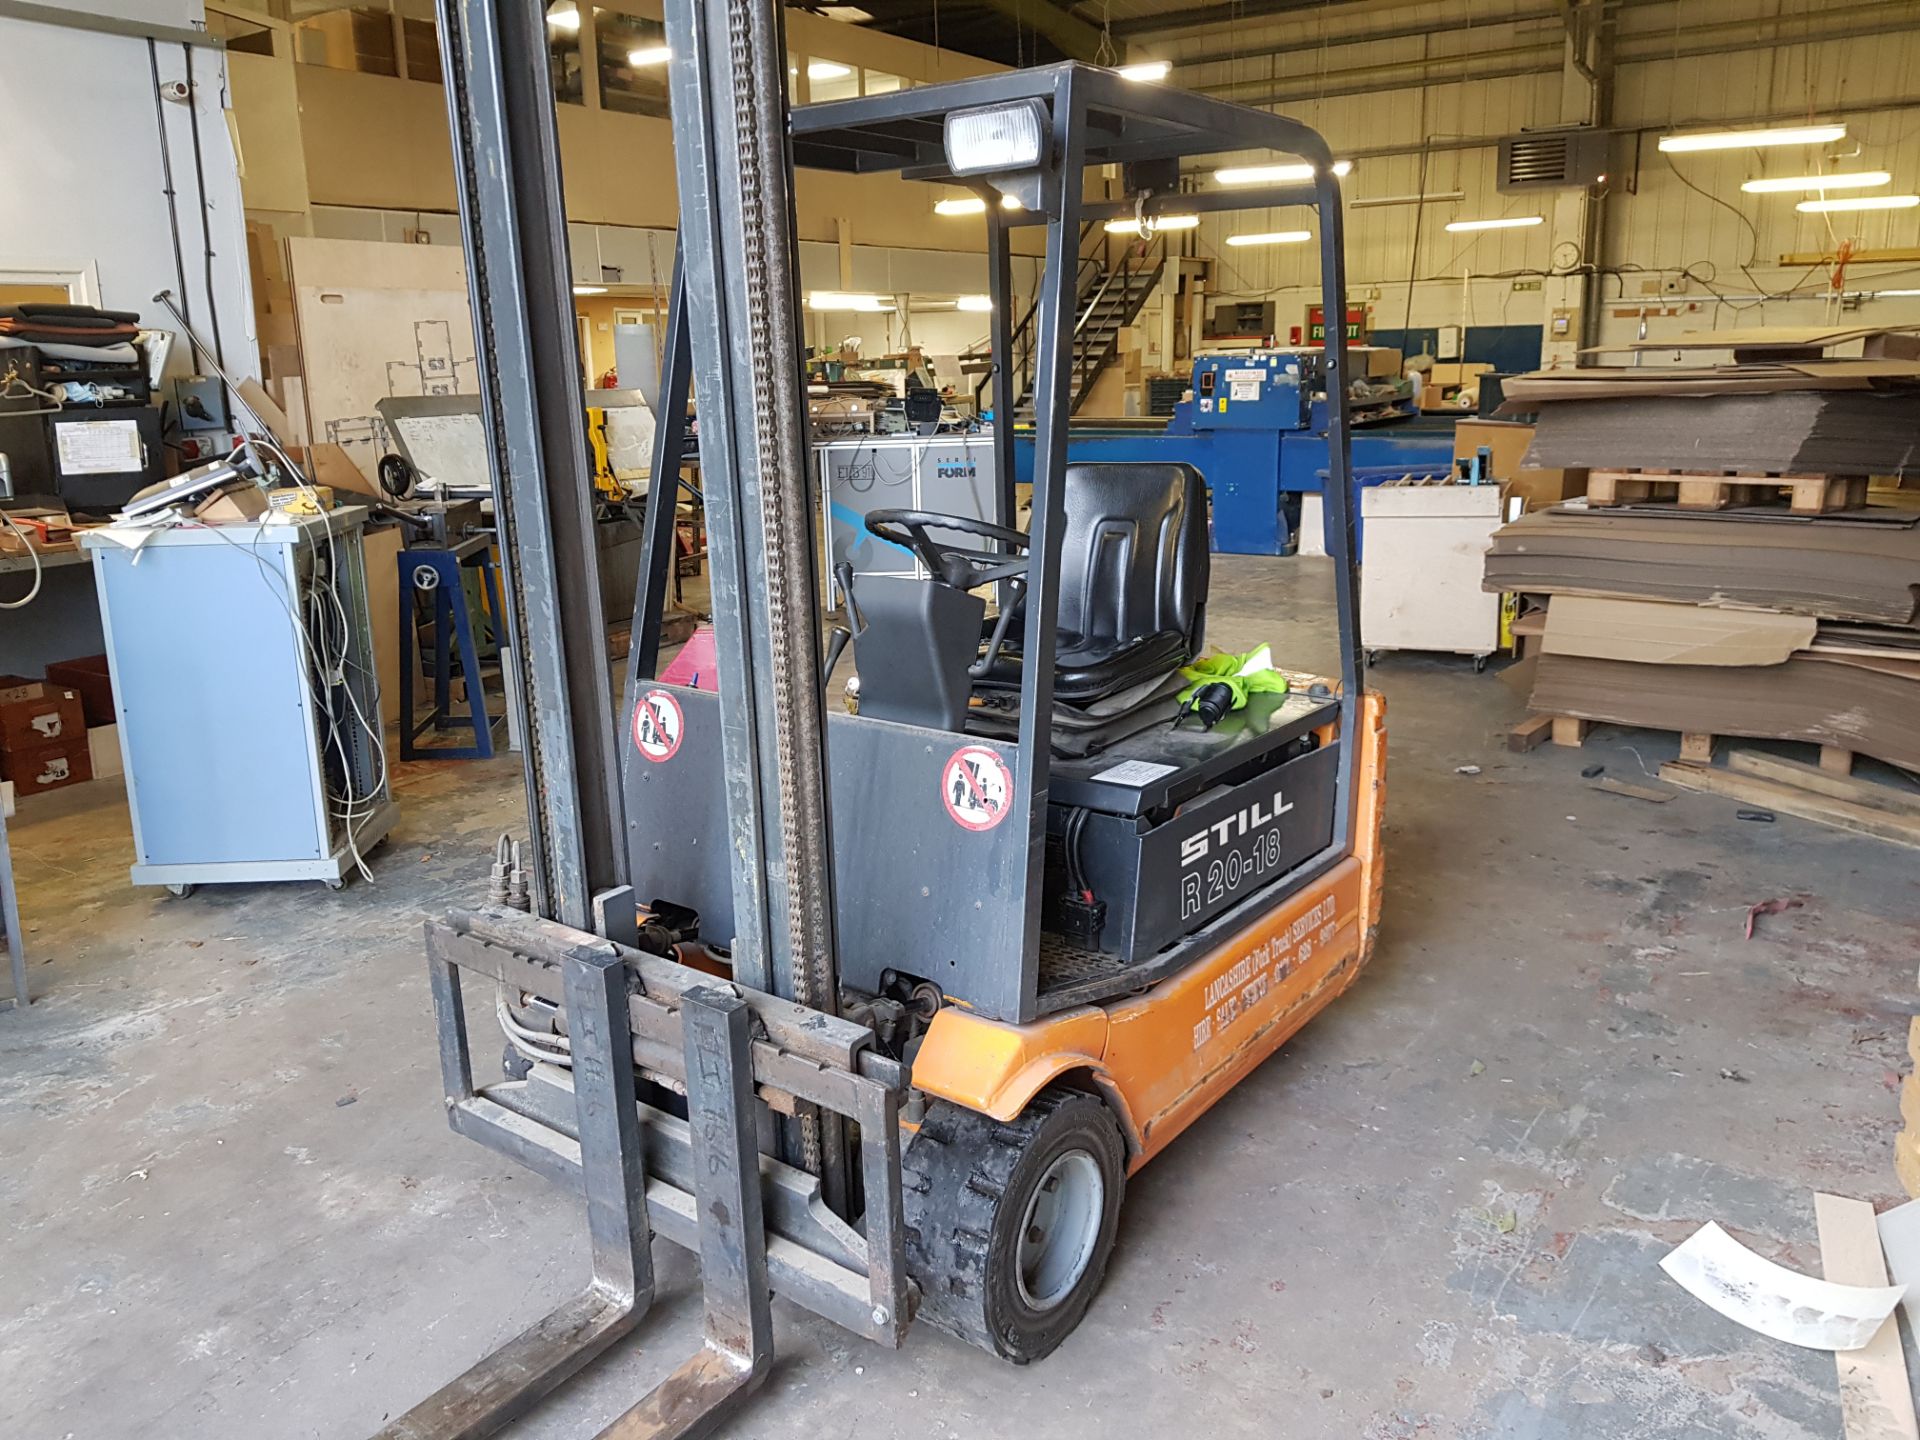 STILL R20-18 ELECTRIC FORKLIFT TRUCK WITH CHARGER DOUBLE MAST SERIAL - 2004 5794 S-SHIFT 1679KG - Image 2 of 7